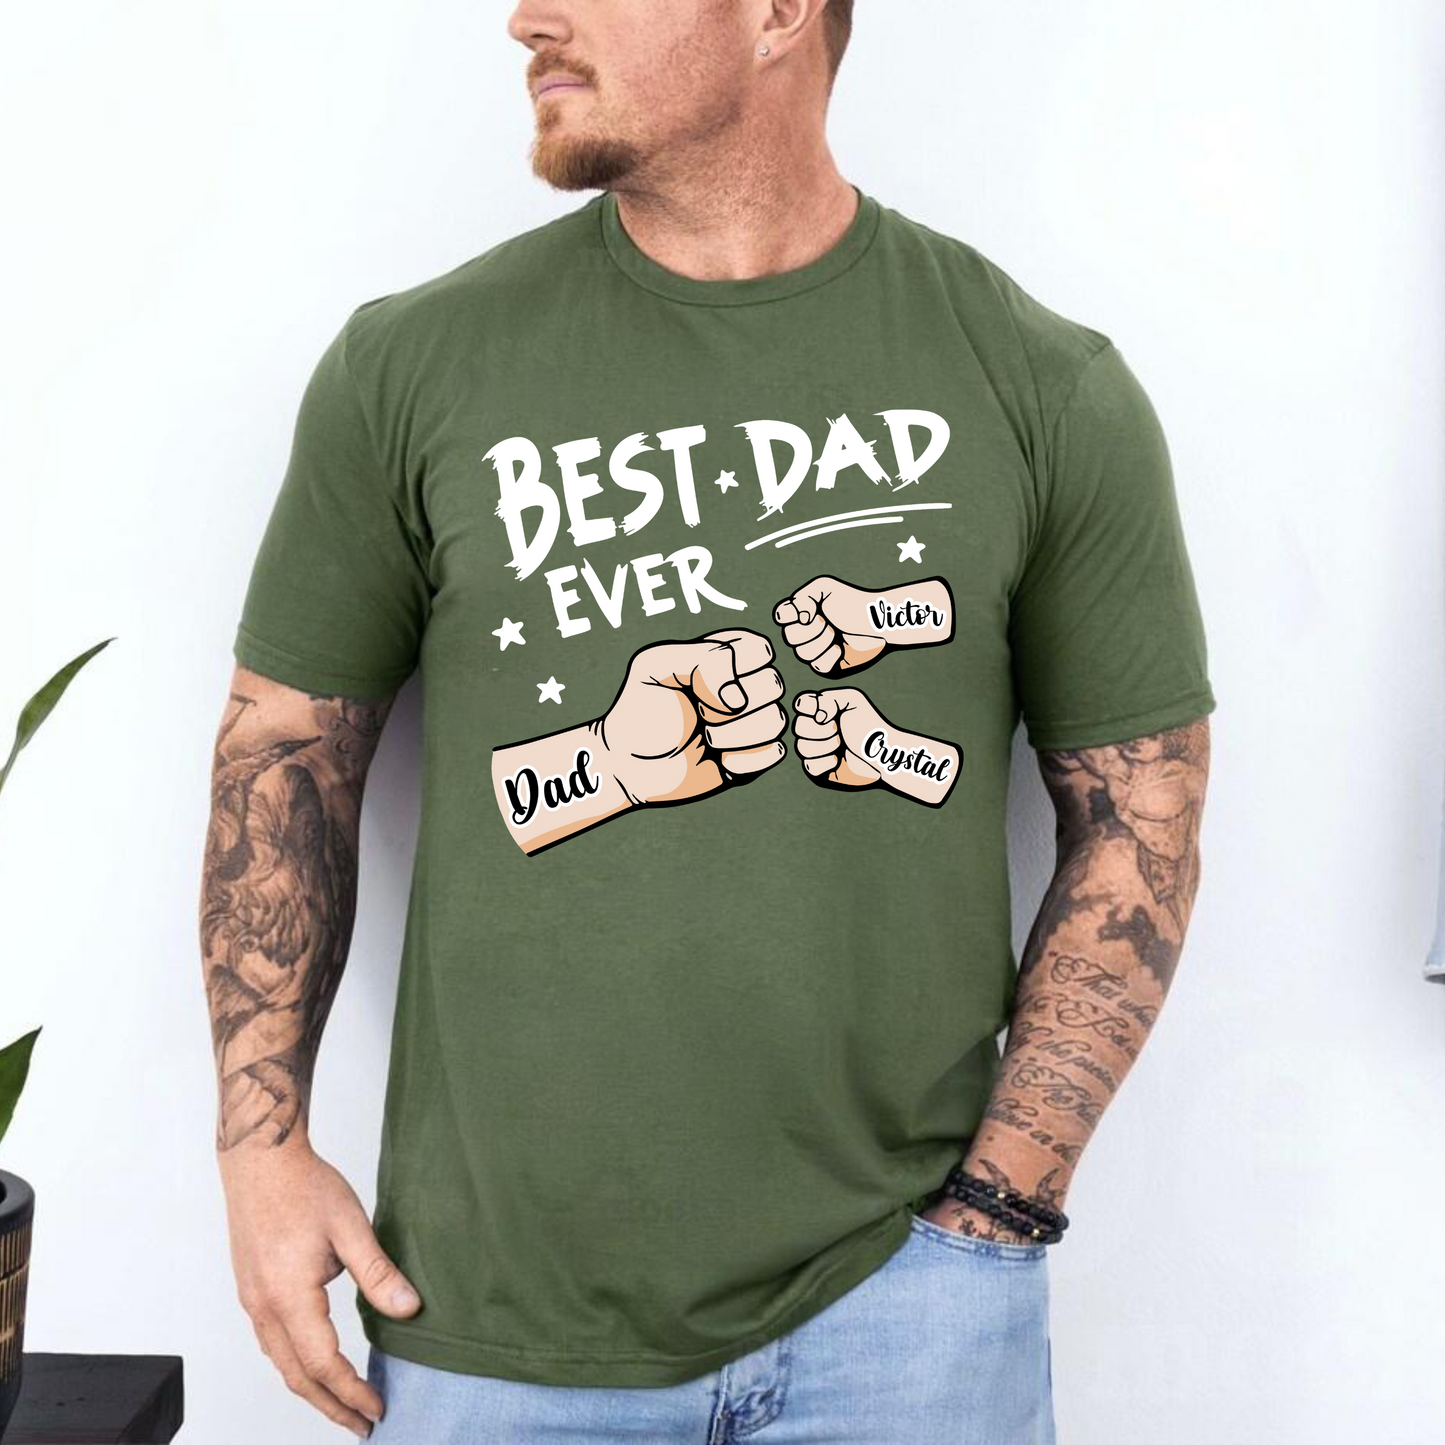 Dad and Kid Fist Bump - Personalized Father's Day Gift